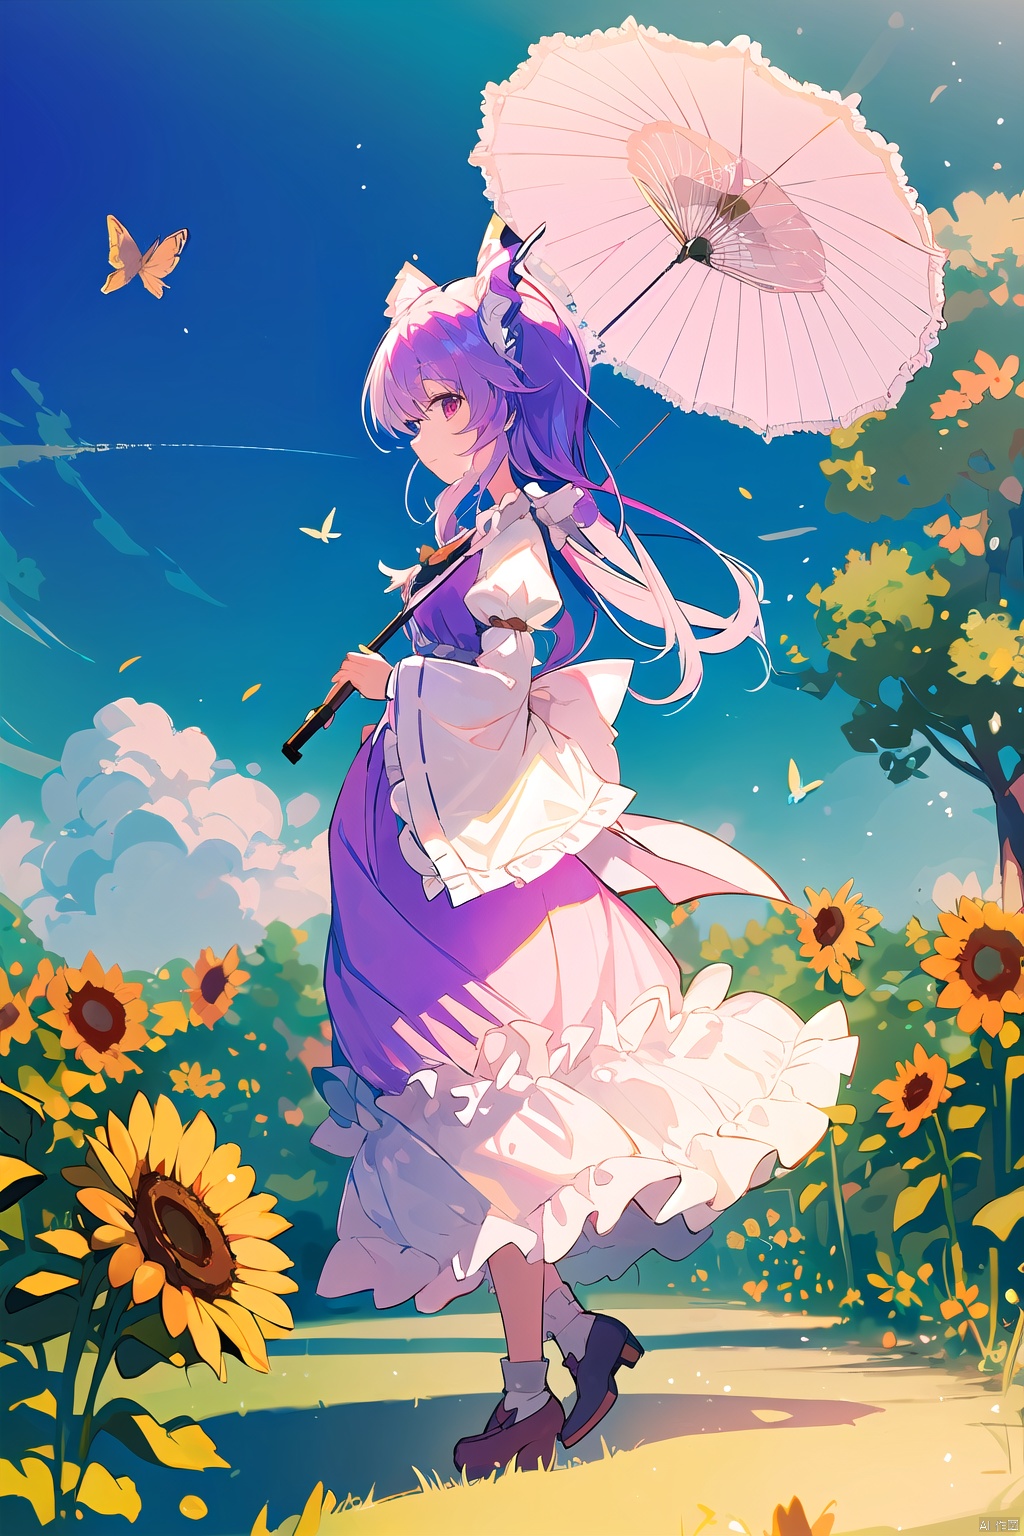 (best quality), (4k resolution), beautiful painting of a girl with purple hair and a parasol. She is walking in a garden full of sunflowers and butterflies. The image has a romantic style with a warm color palette that creates a contrast with the cool sky. Inspired by Yuyuko Saigyouji, Touhou Project, Anime Art by ZUN and ideolo, Photoshop, 3D, HD, spring, elegance, gentle, mid-shot, perspective, soft lighting, (golden ratio)